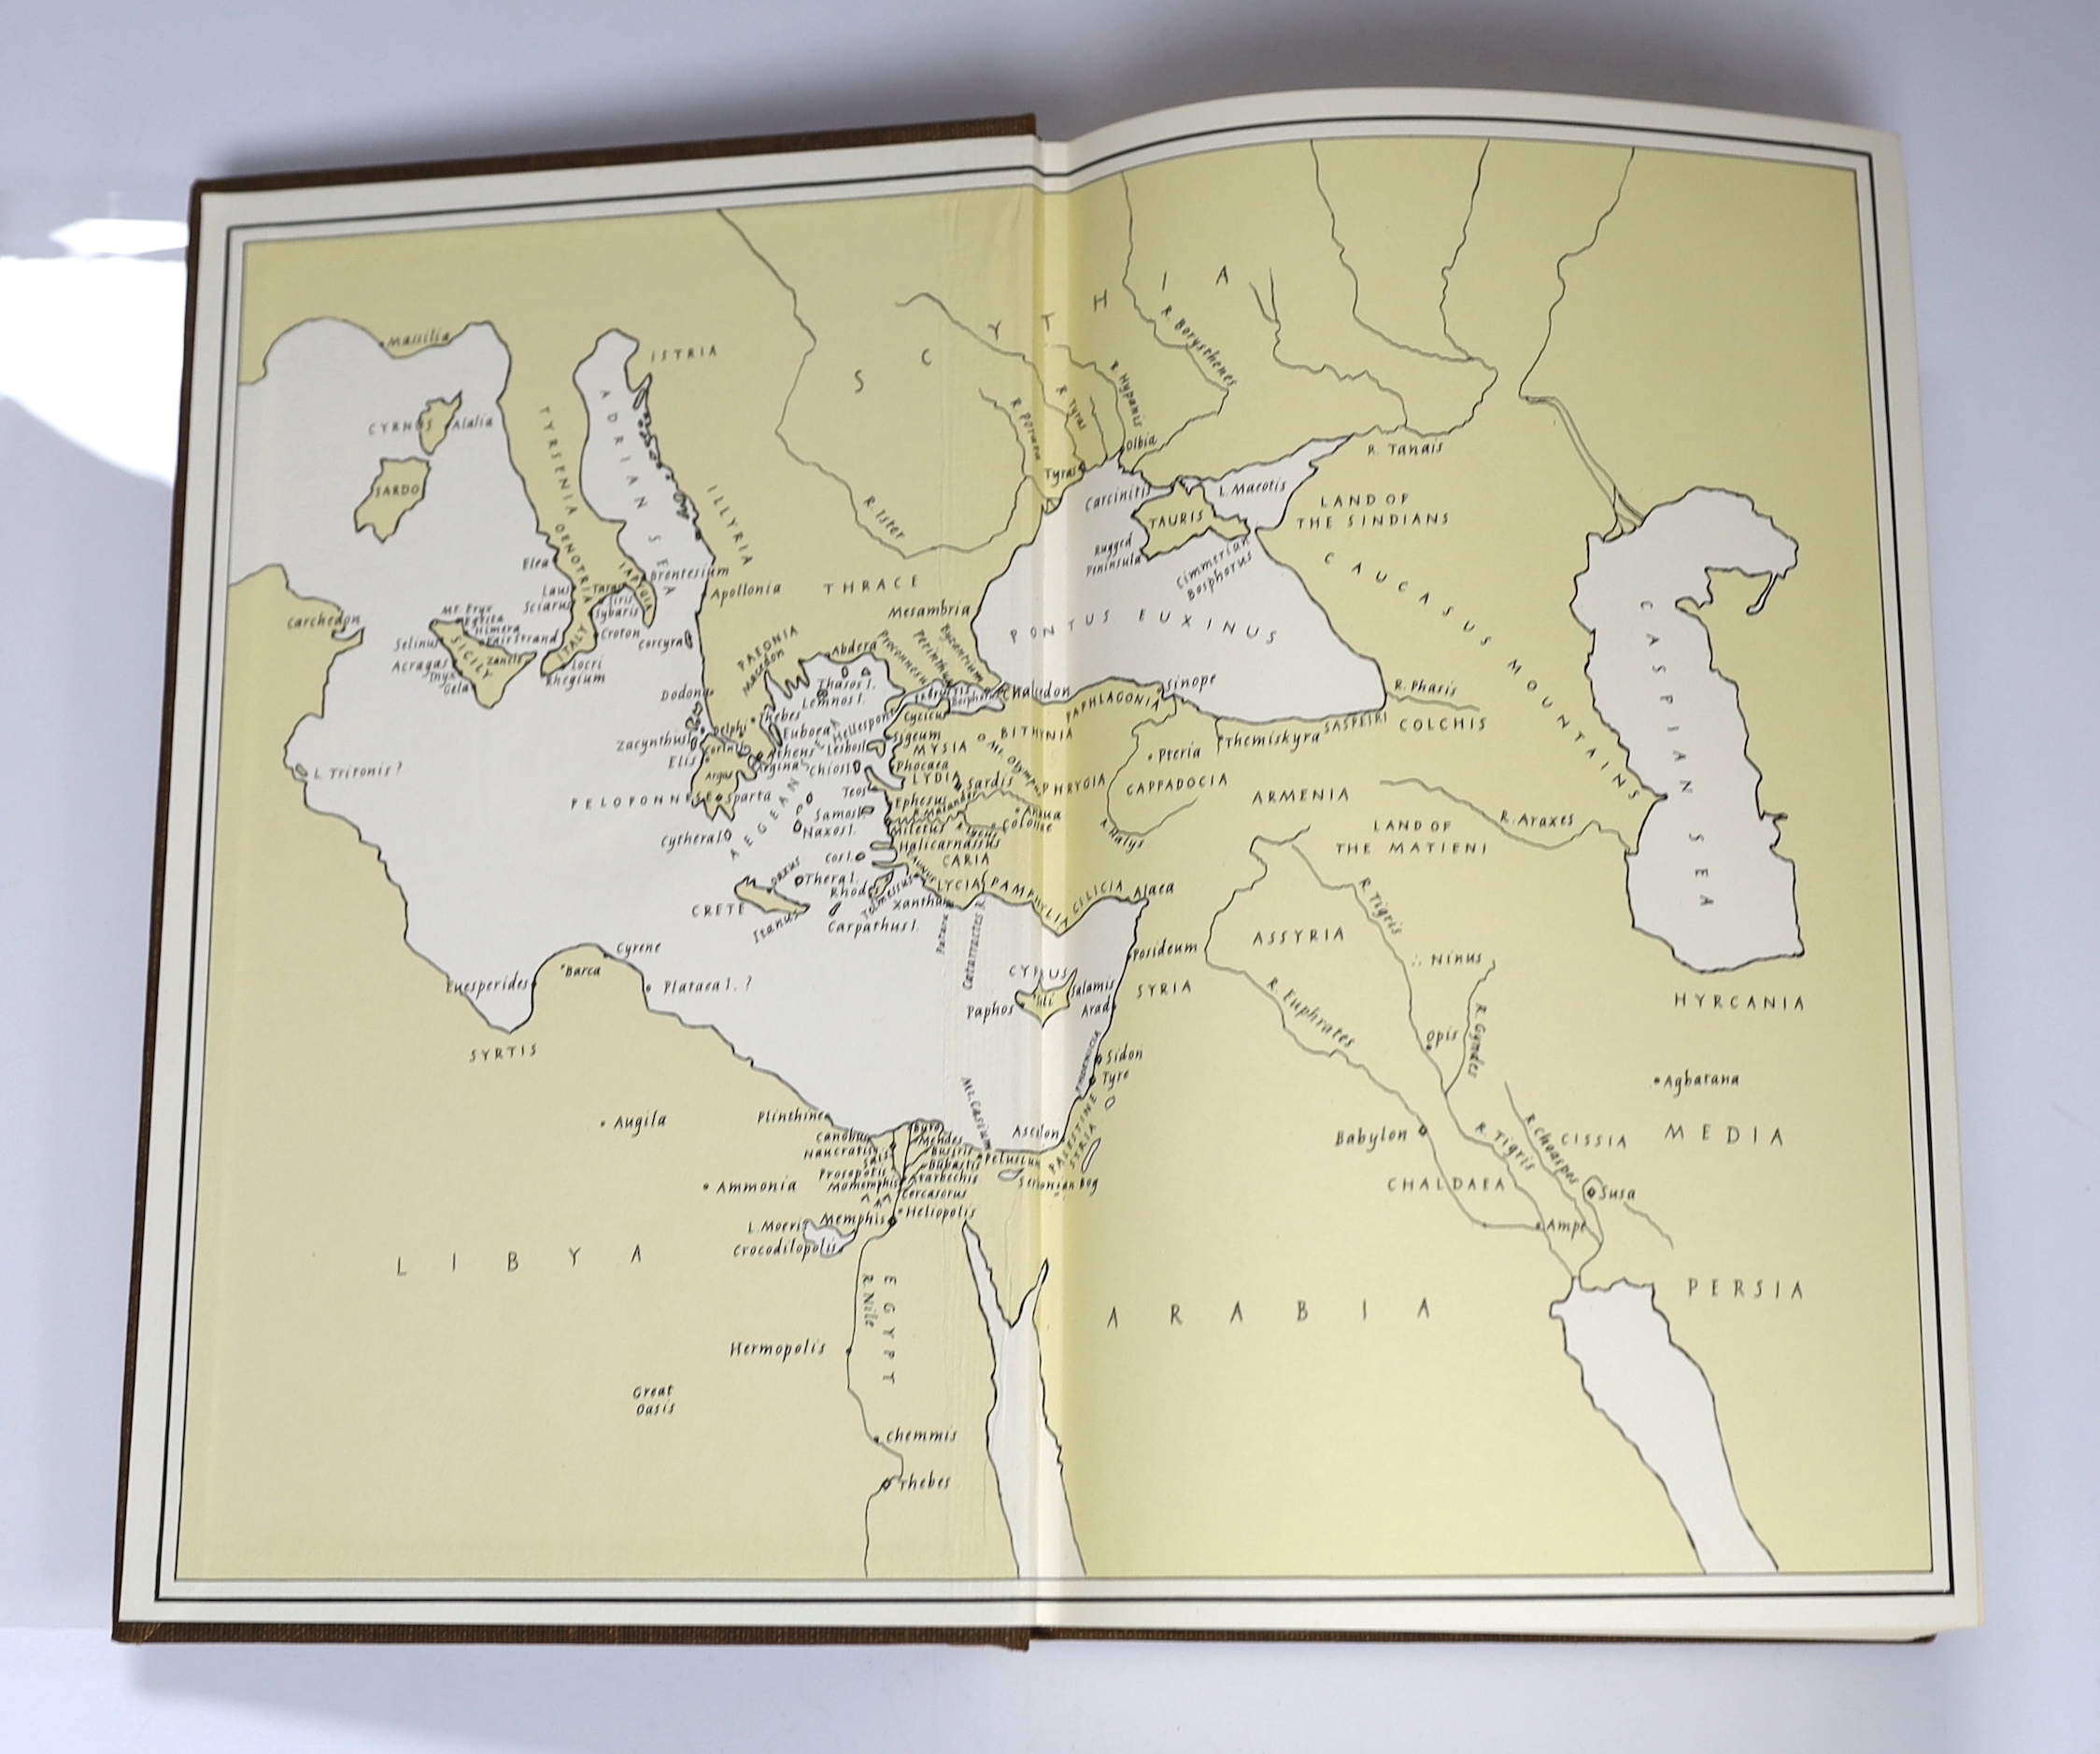 Herodotus - The Histories of Herodotus of Halicarnassus, translated by Harry Carter, illustrated by Edward Bawden, one of 1500, 4to, gilt lettered brown cloth, with map endpapers, Joh. Enschede en Zonen, Haarlem, 1958, w